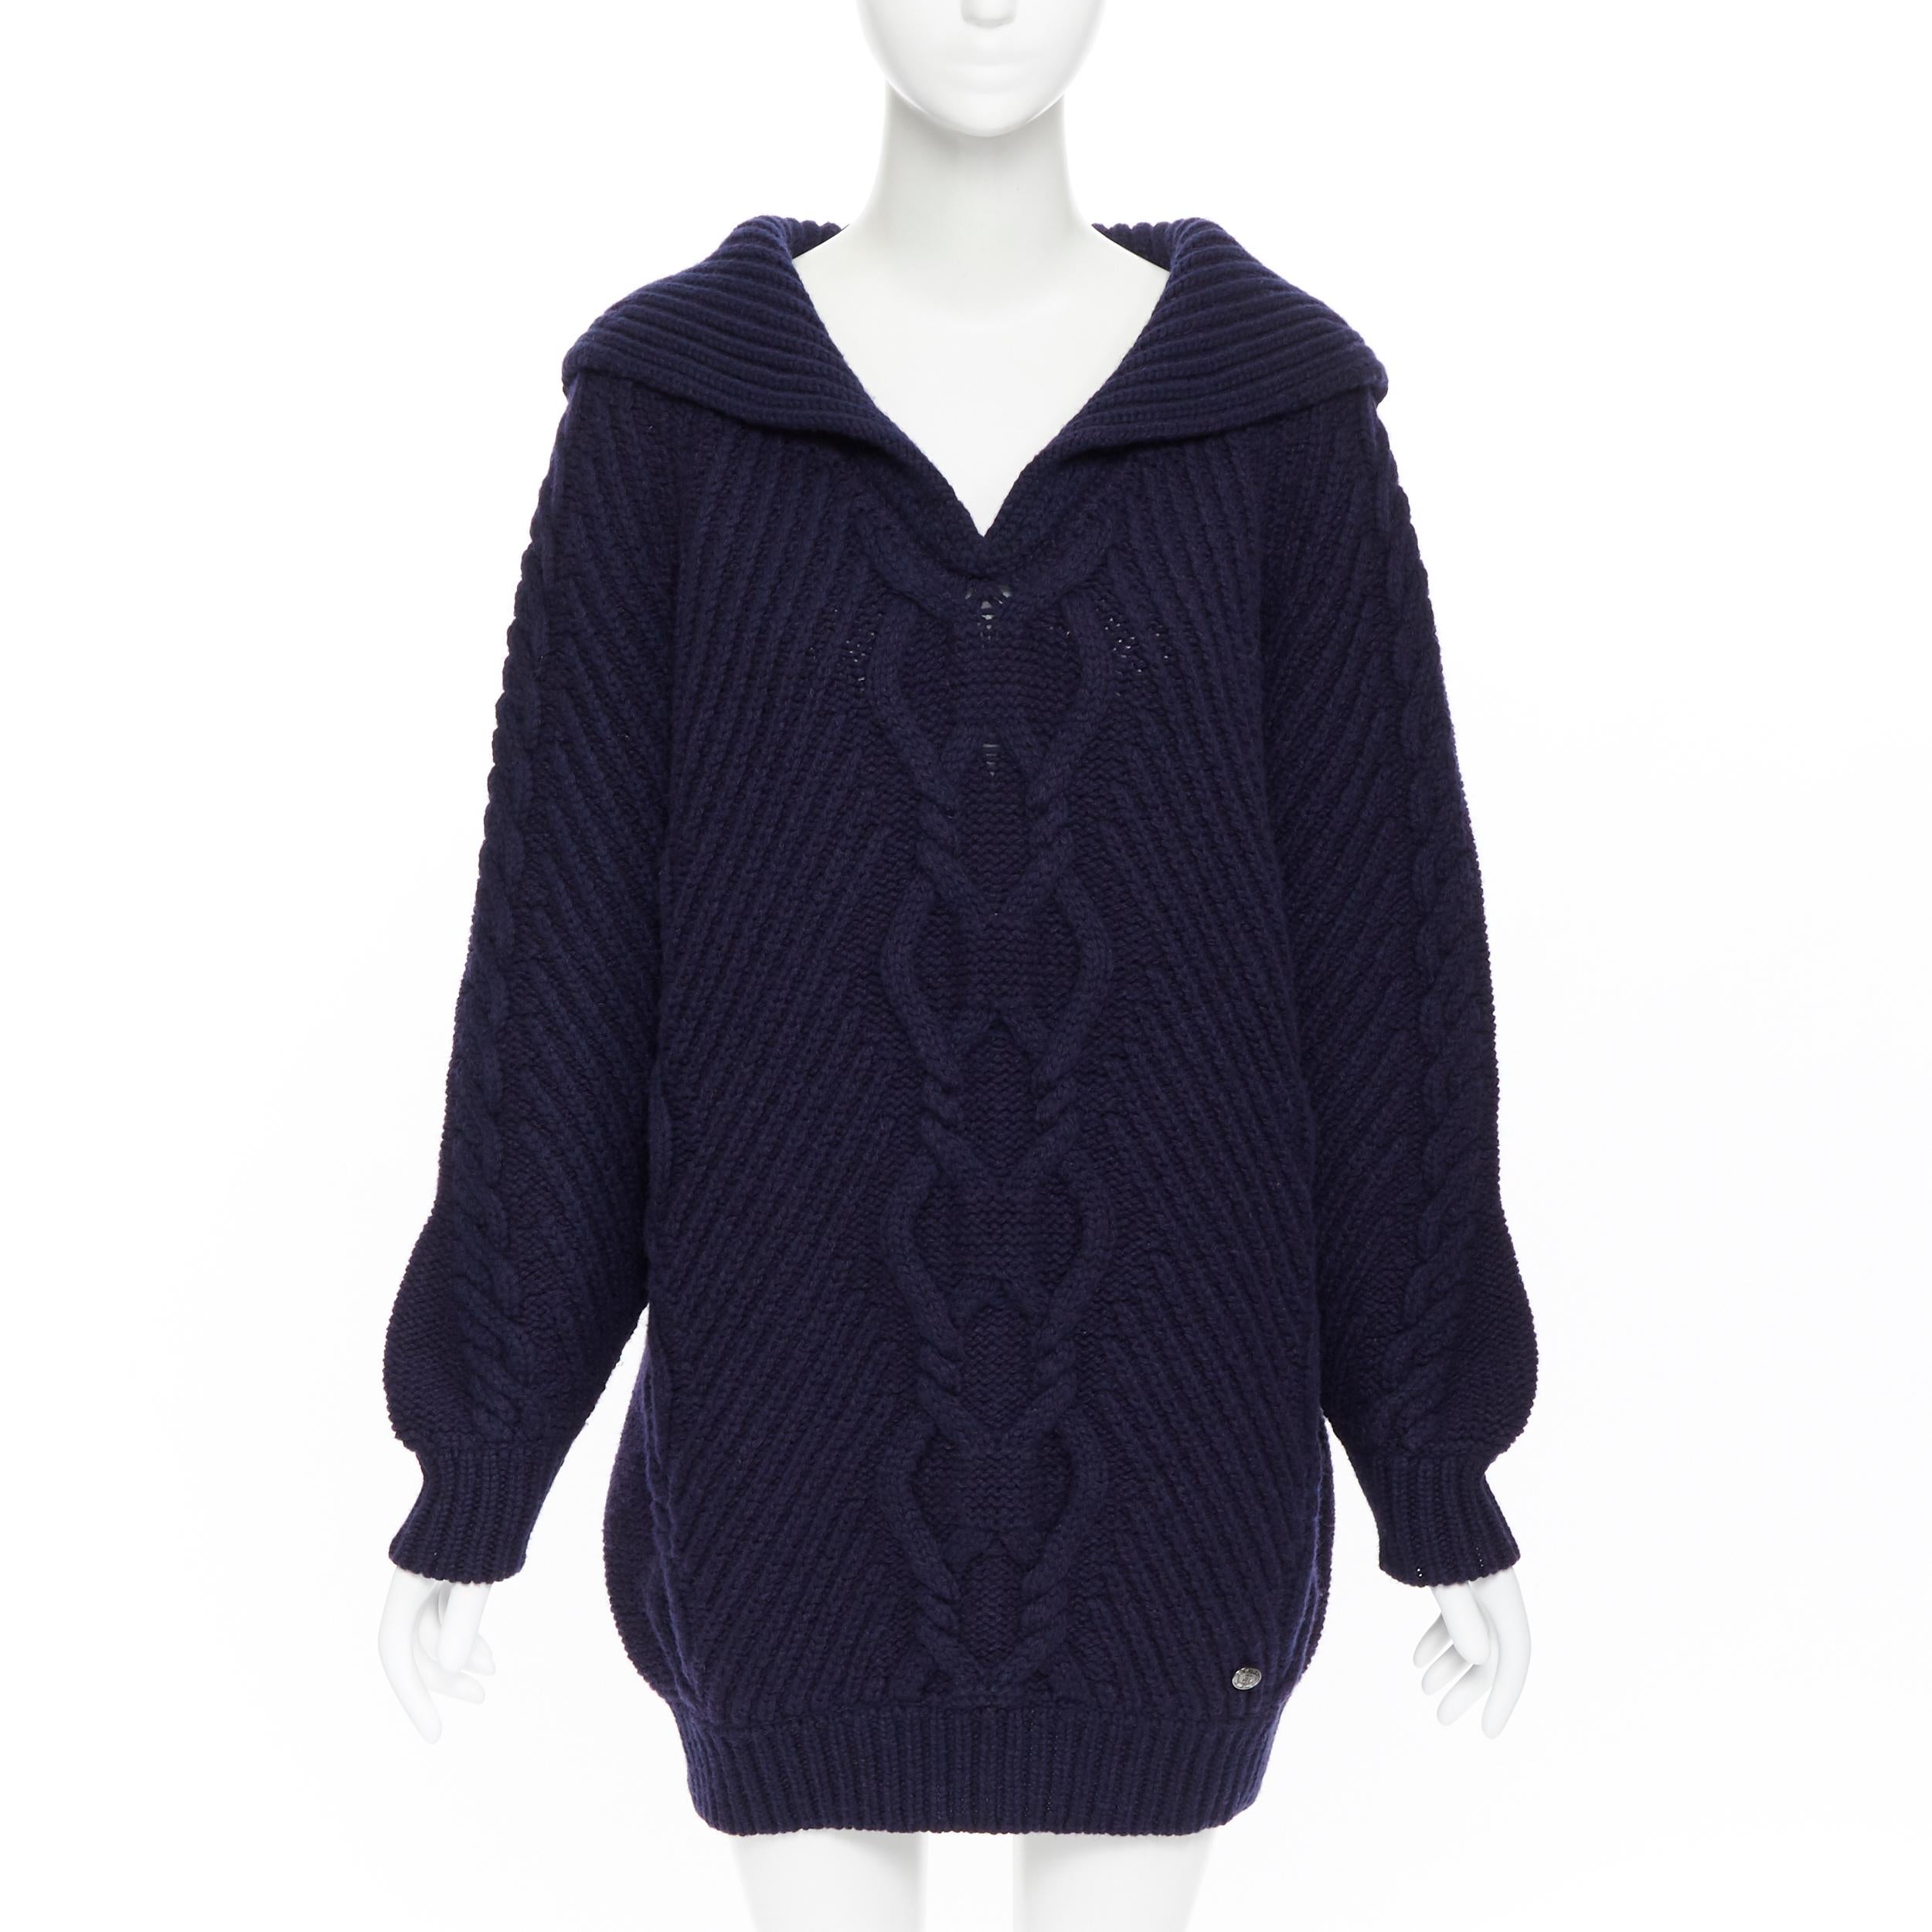 runway CHANEL 18A navy wool cashmere cable knit sailor collar sweater dress FR42
Brand: Chanel
Designer: Karl Lagerfeld
Collection: 2018 Metier D'Arts
Model Name / Style: Sweater dress
Material: Wool, cashmere
Color: Navy
Pattern: Solid
Extra